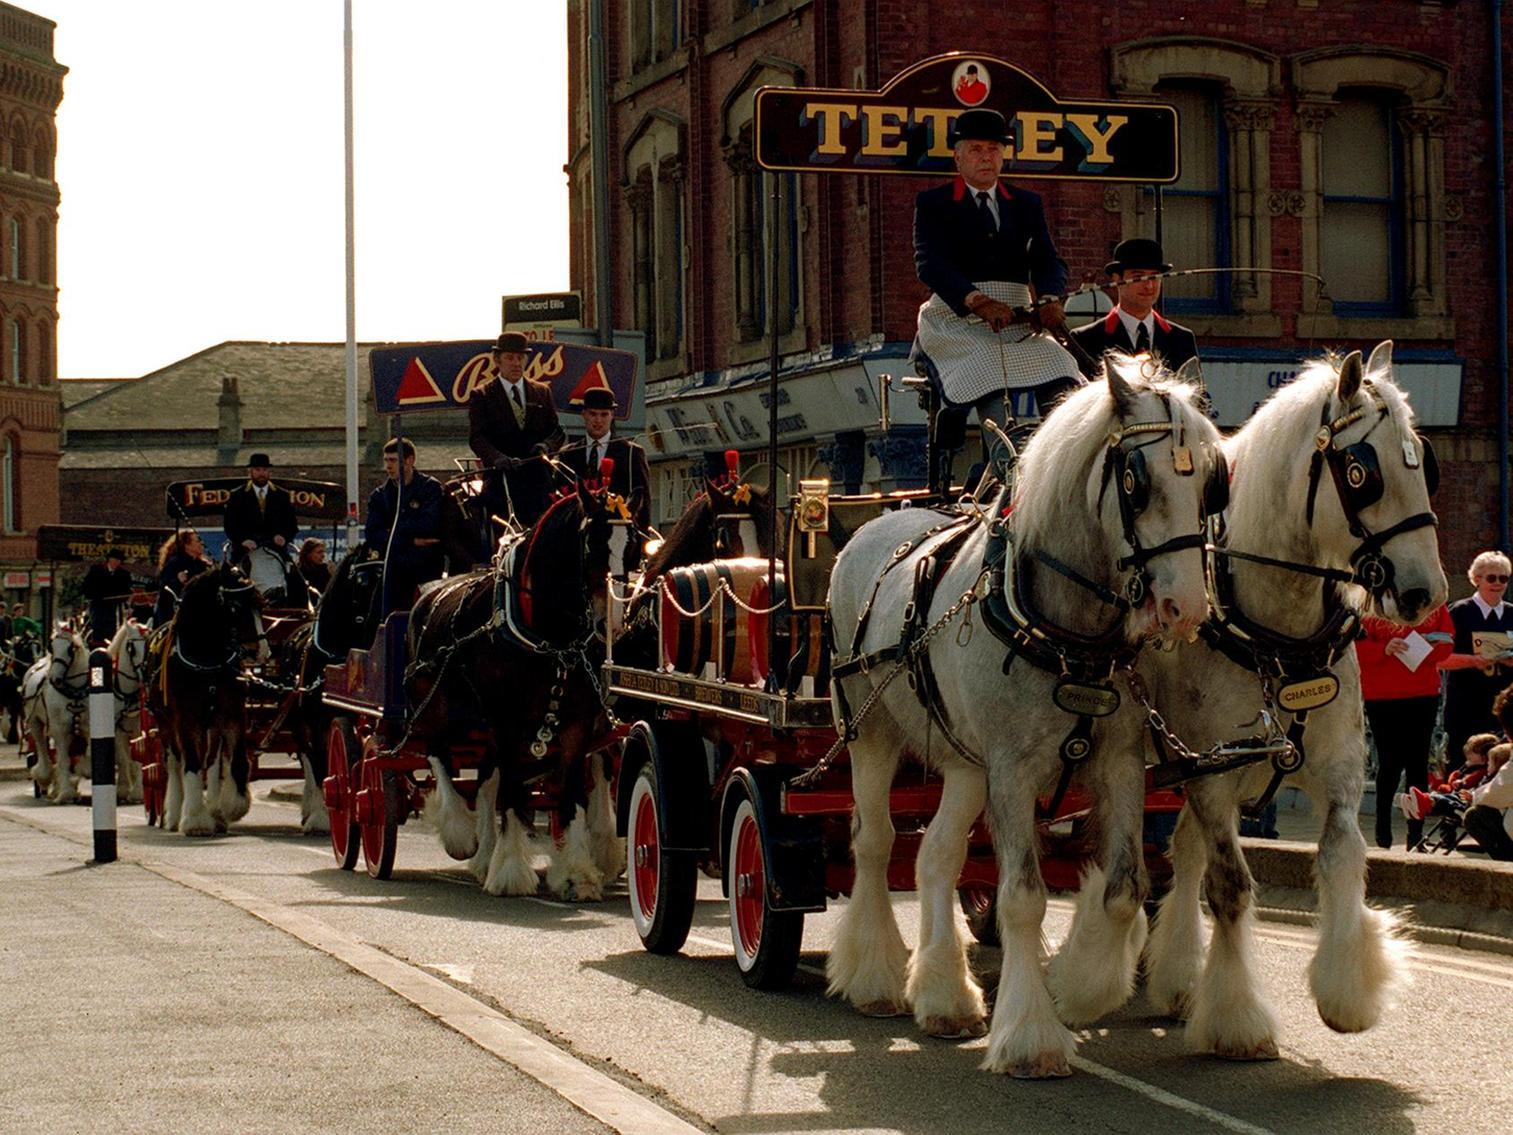 Celebrating the third anniversary of the opening of Tetley's Brewery Wharf, a parade of seven brewers drays paraded through the city centre.